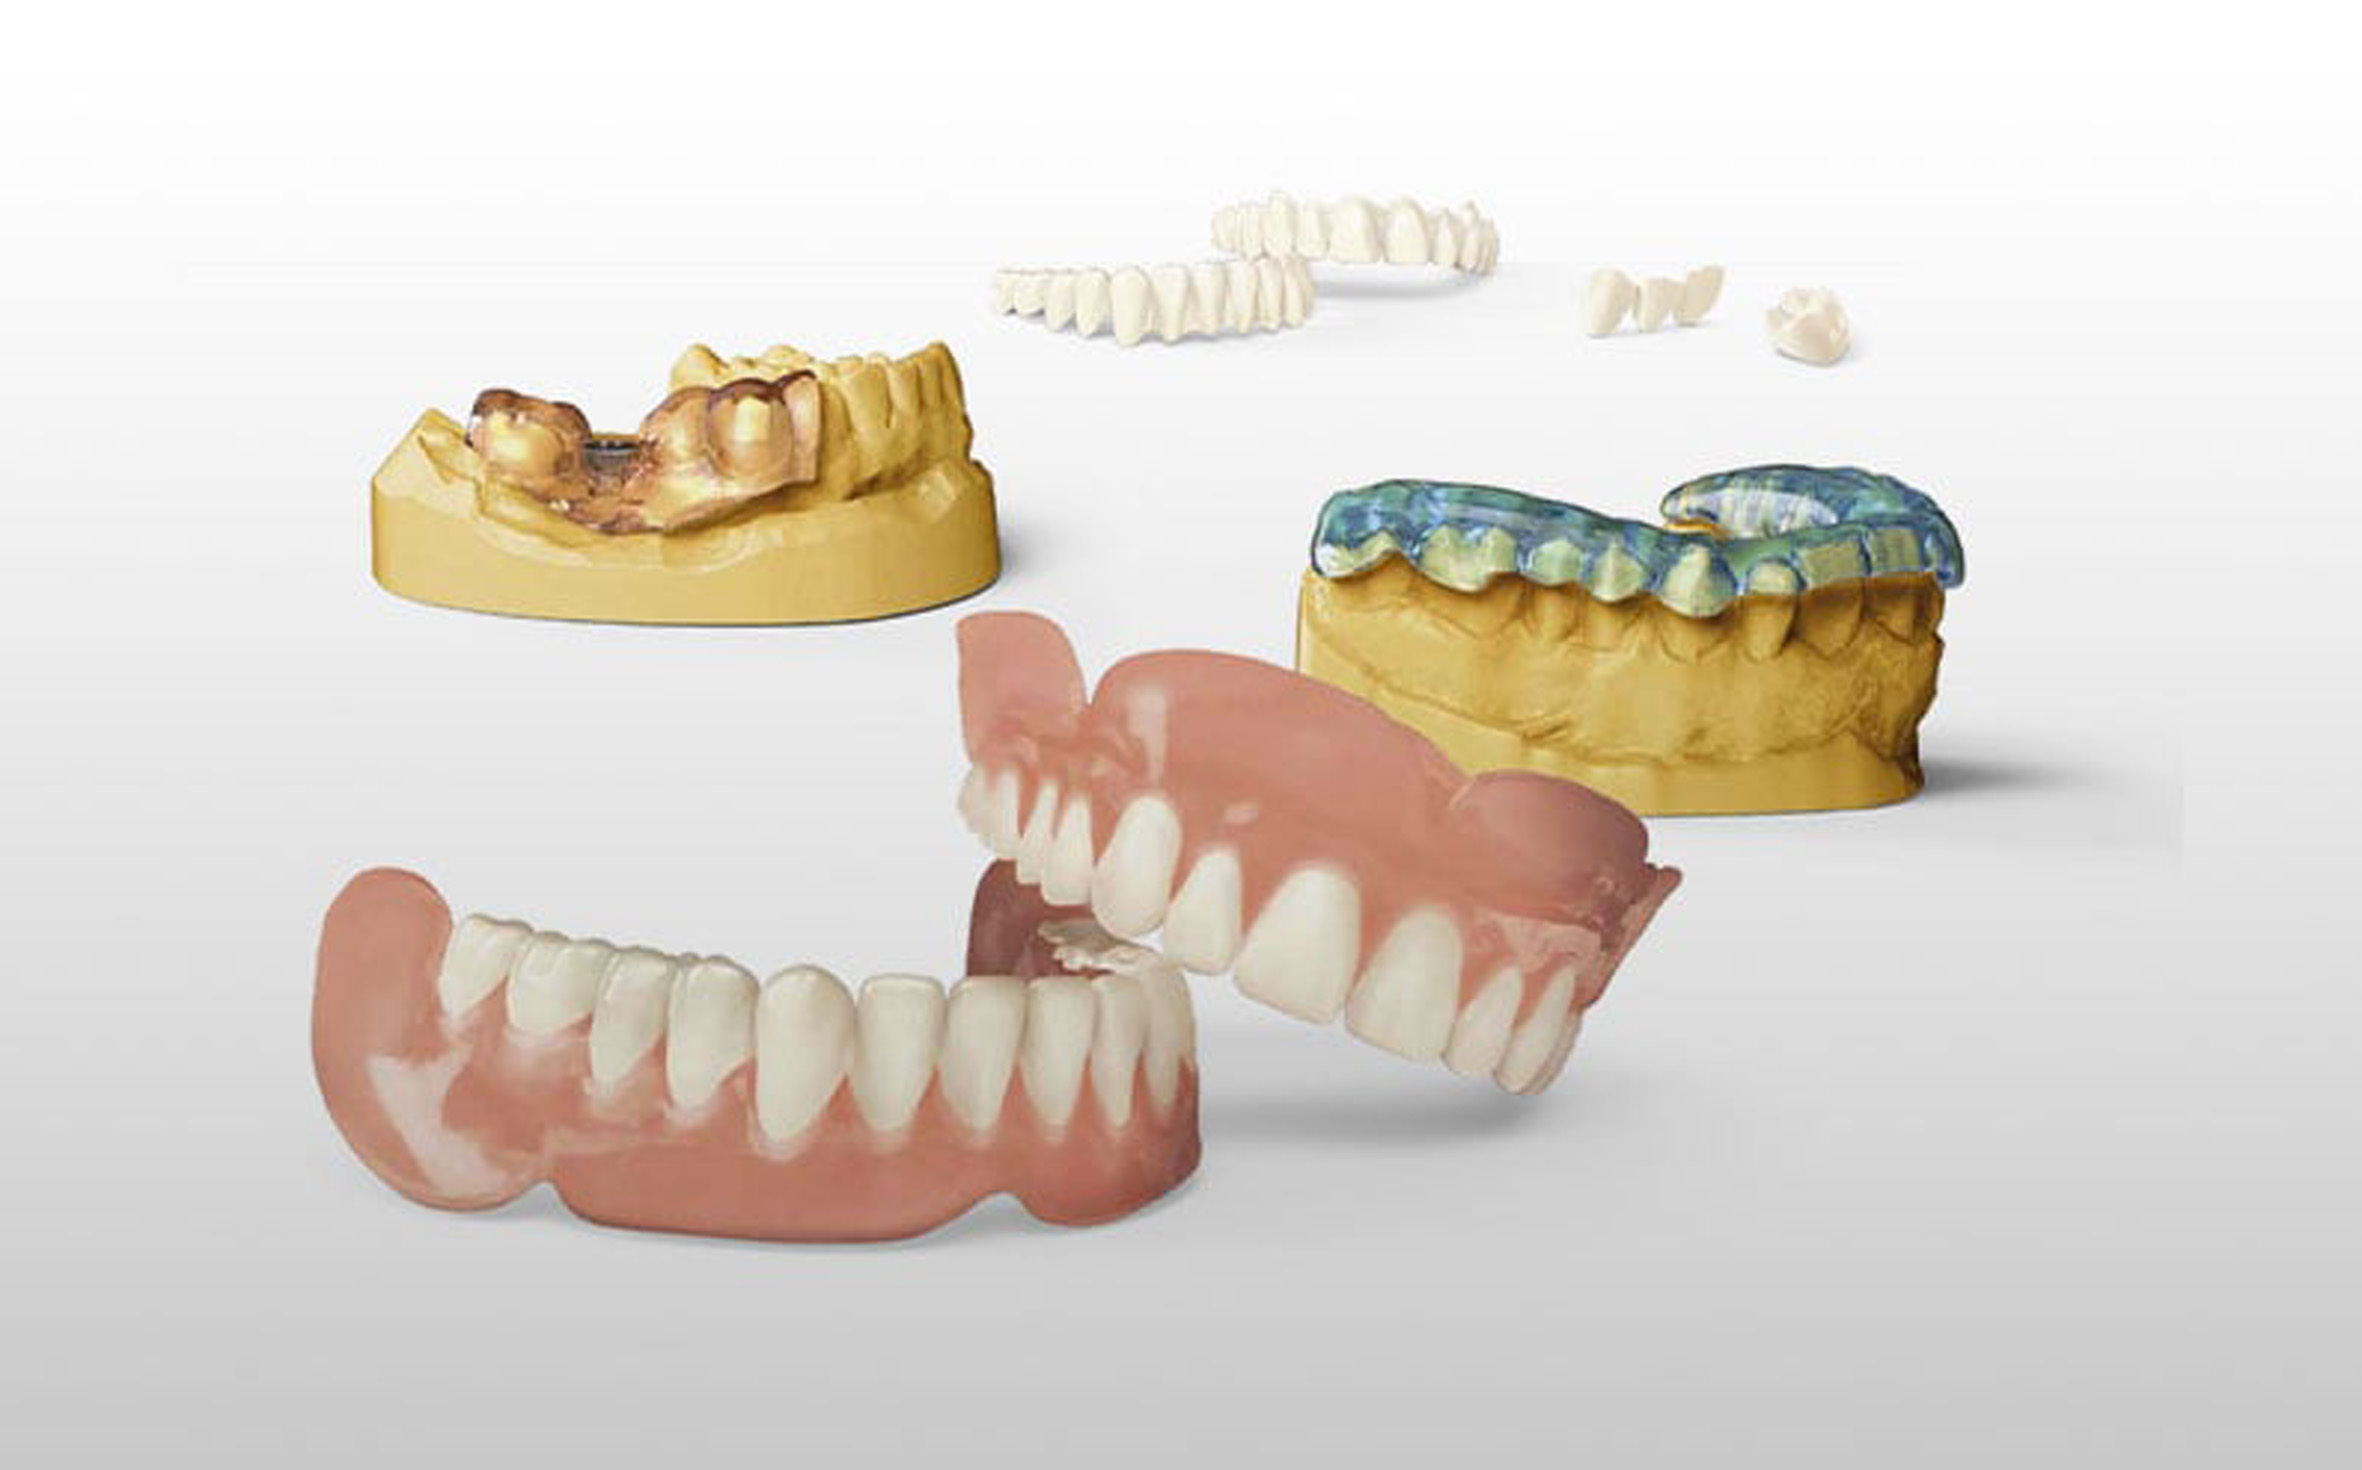 3D Printing is Excellent for Dental Crowns